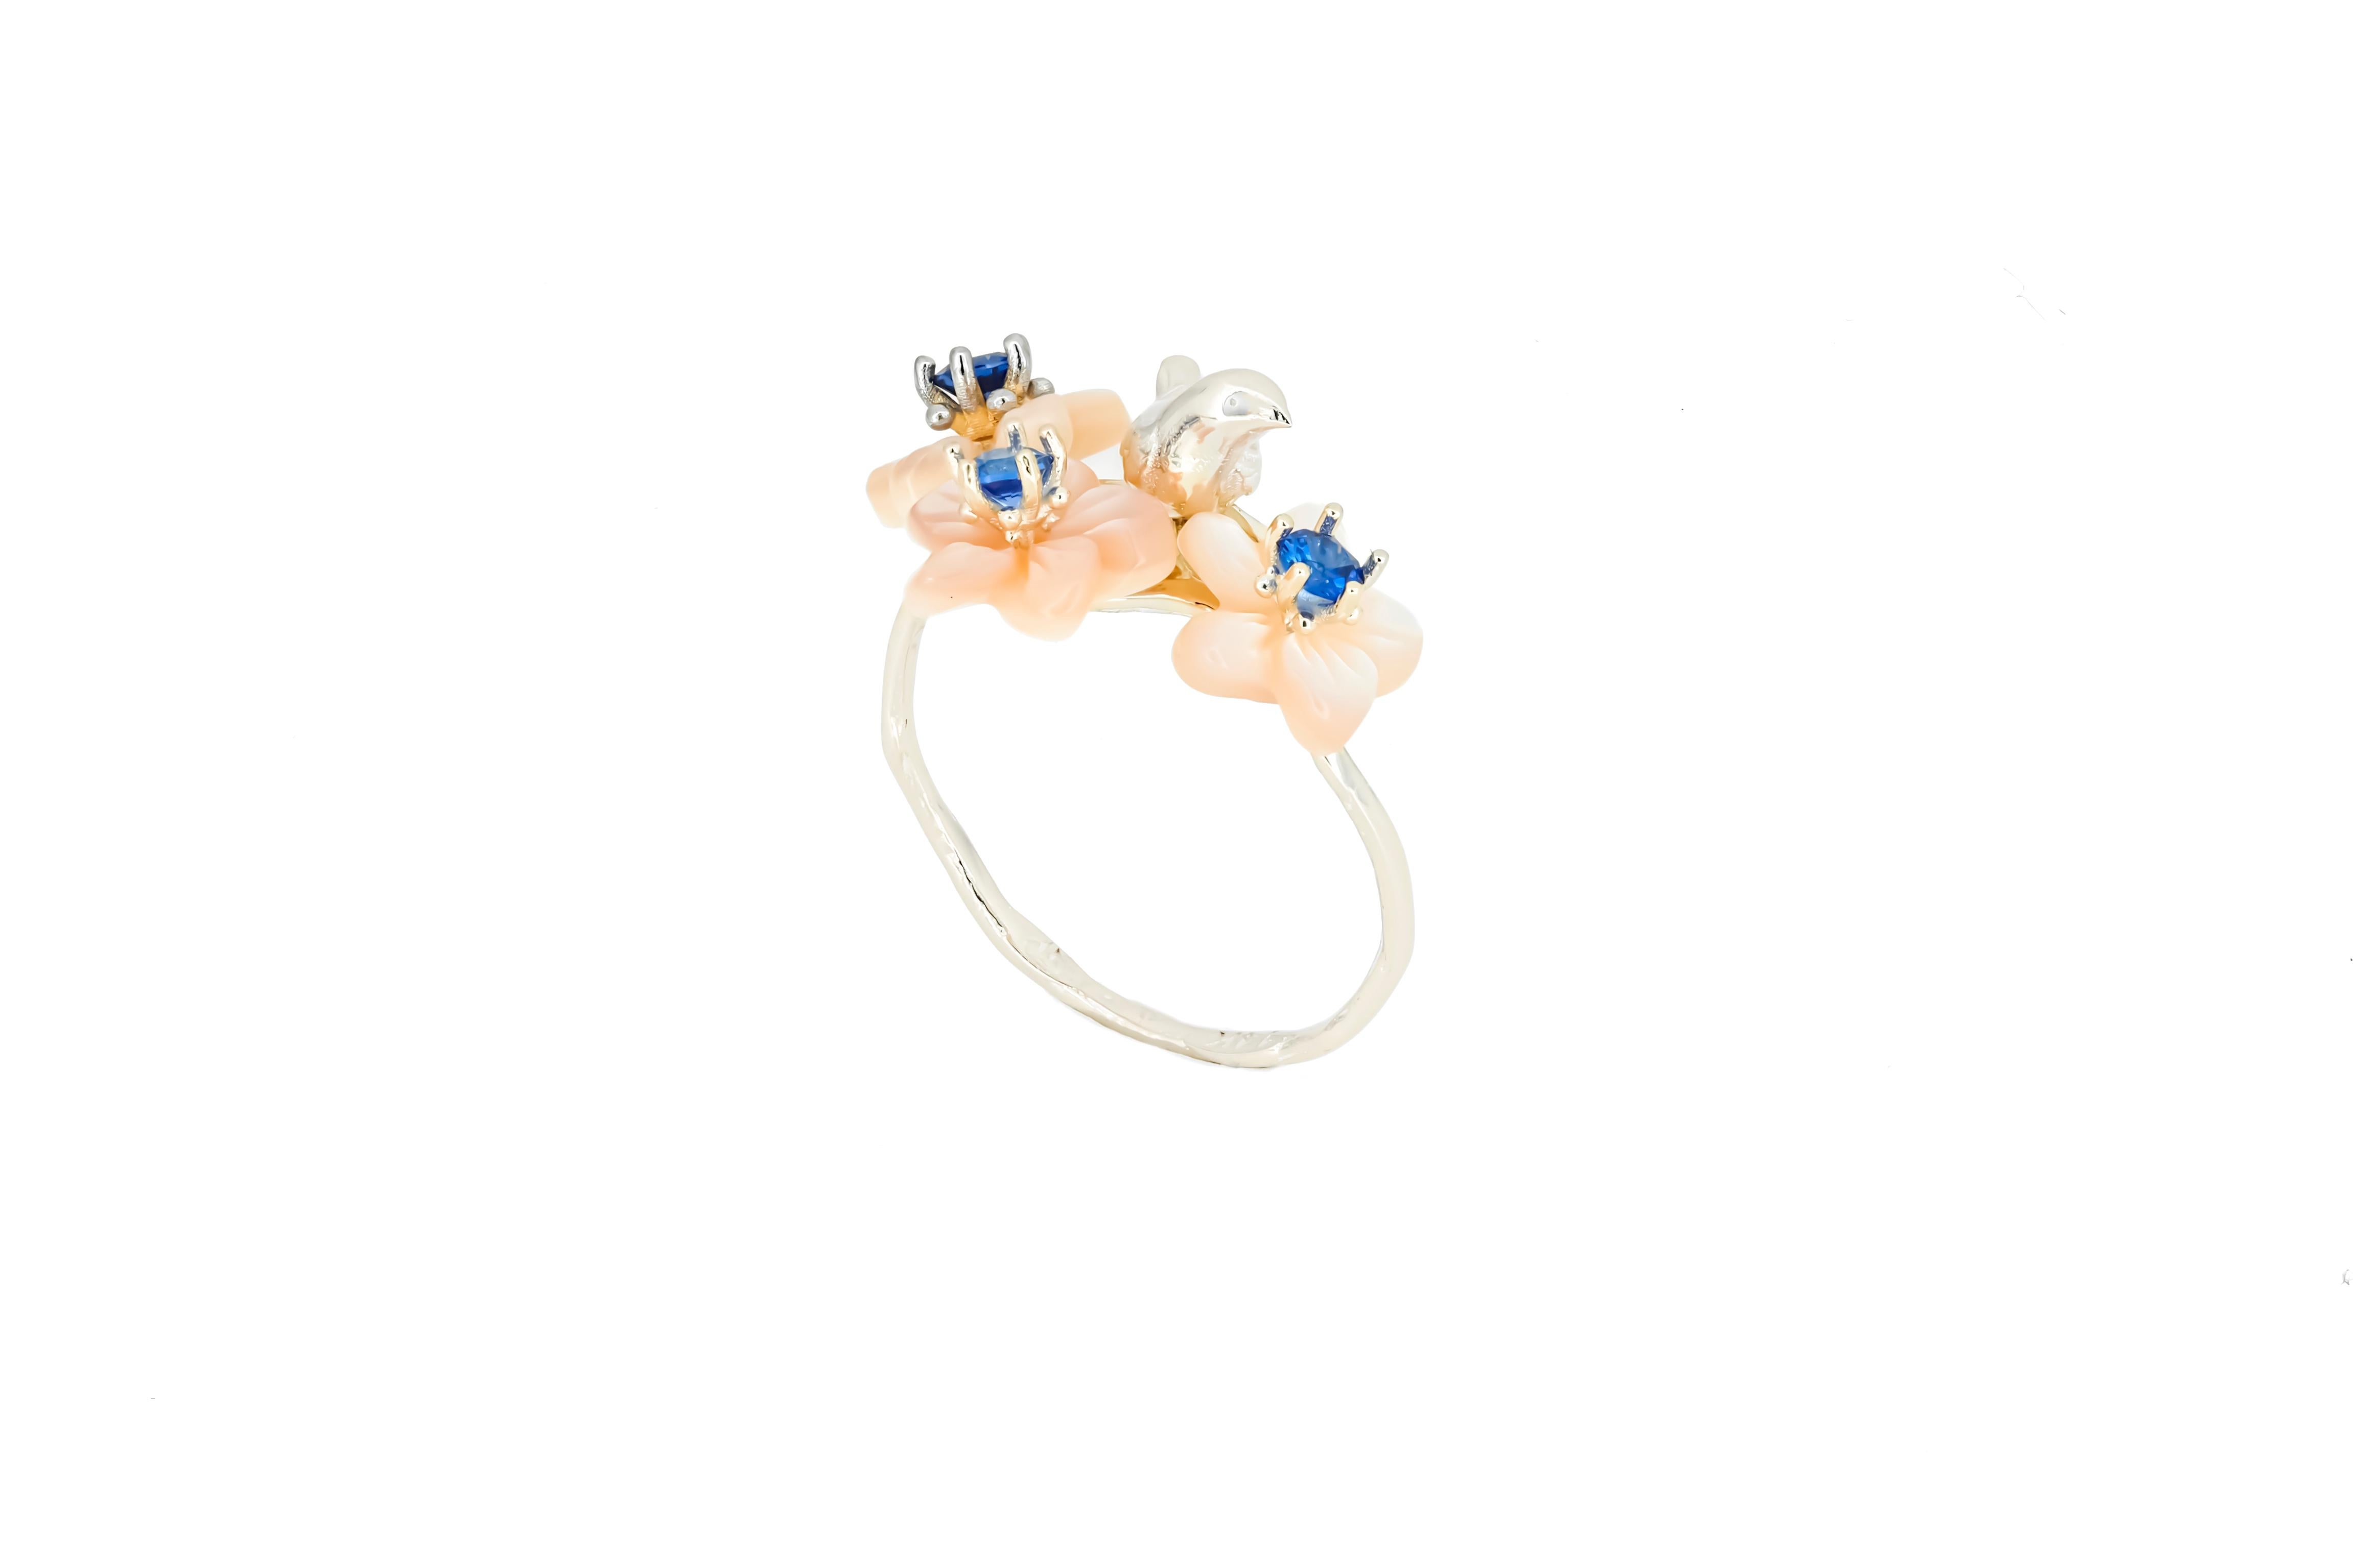 14k Gold Bird on Branch Ring with Sapphires and Carved Mother of Pearl Flowers 7